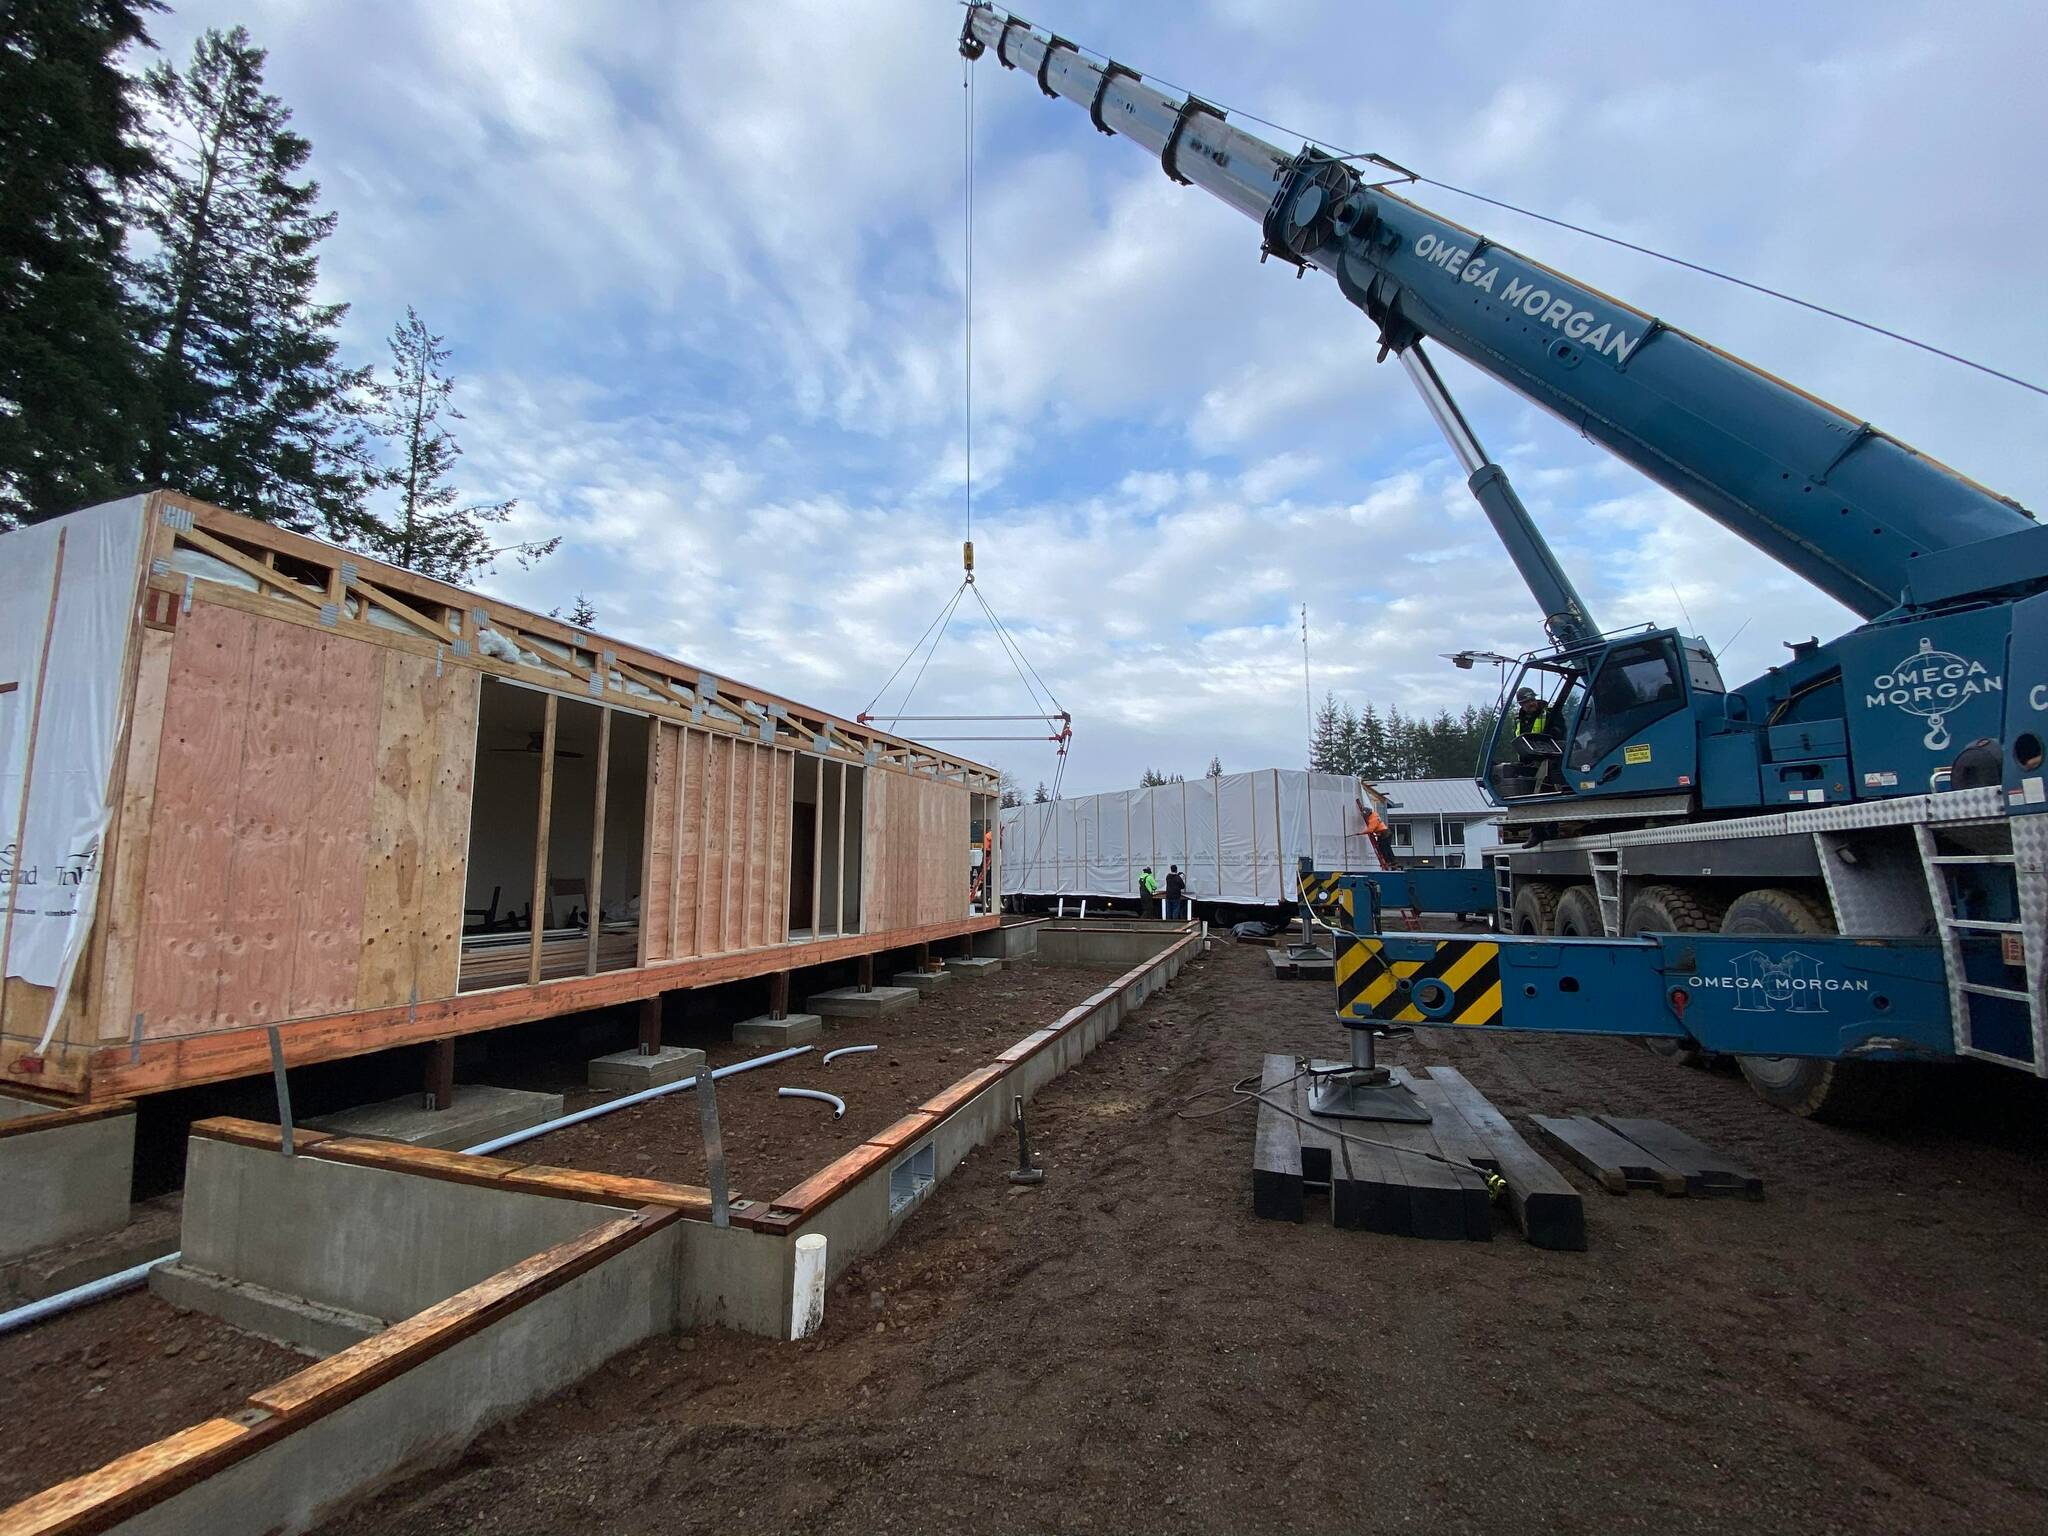 A large crane was used to place the modules onto the prepared foundation.
A large crane was brought in from Seattle to put the Hobucket House into place. (North Olympic Regional Veterans Housing Network)